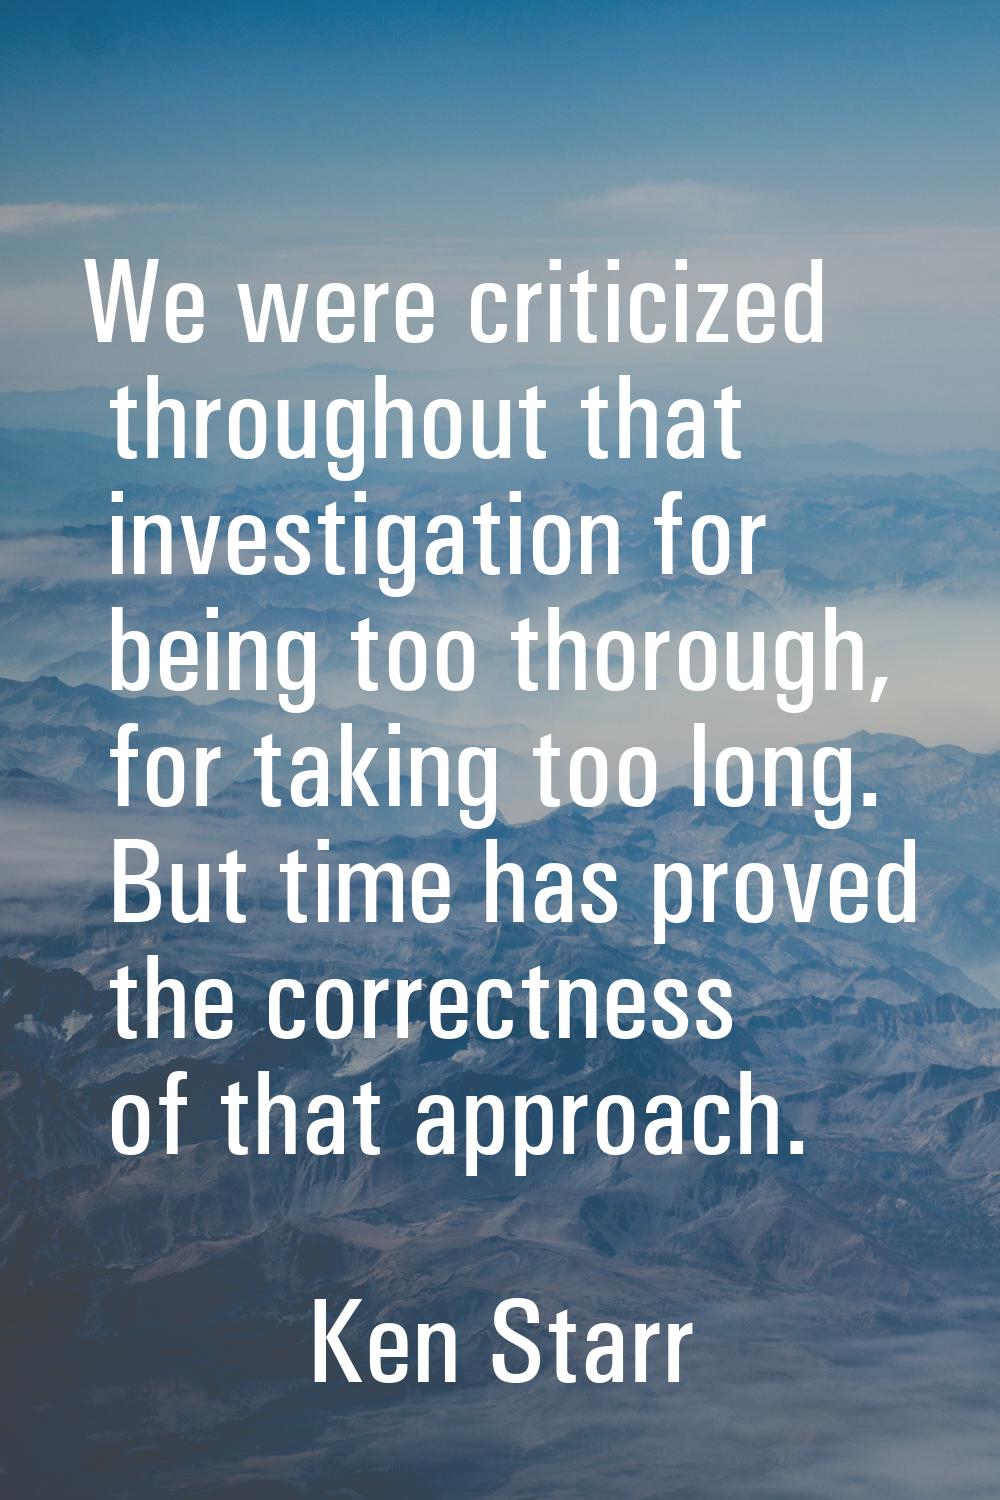 We were criticized throughout that investigation for being too thorough, for taking too long. But t